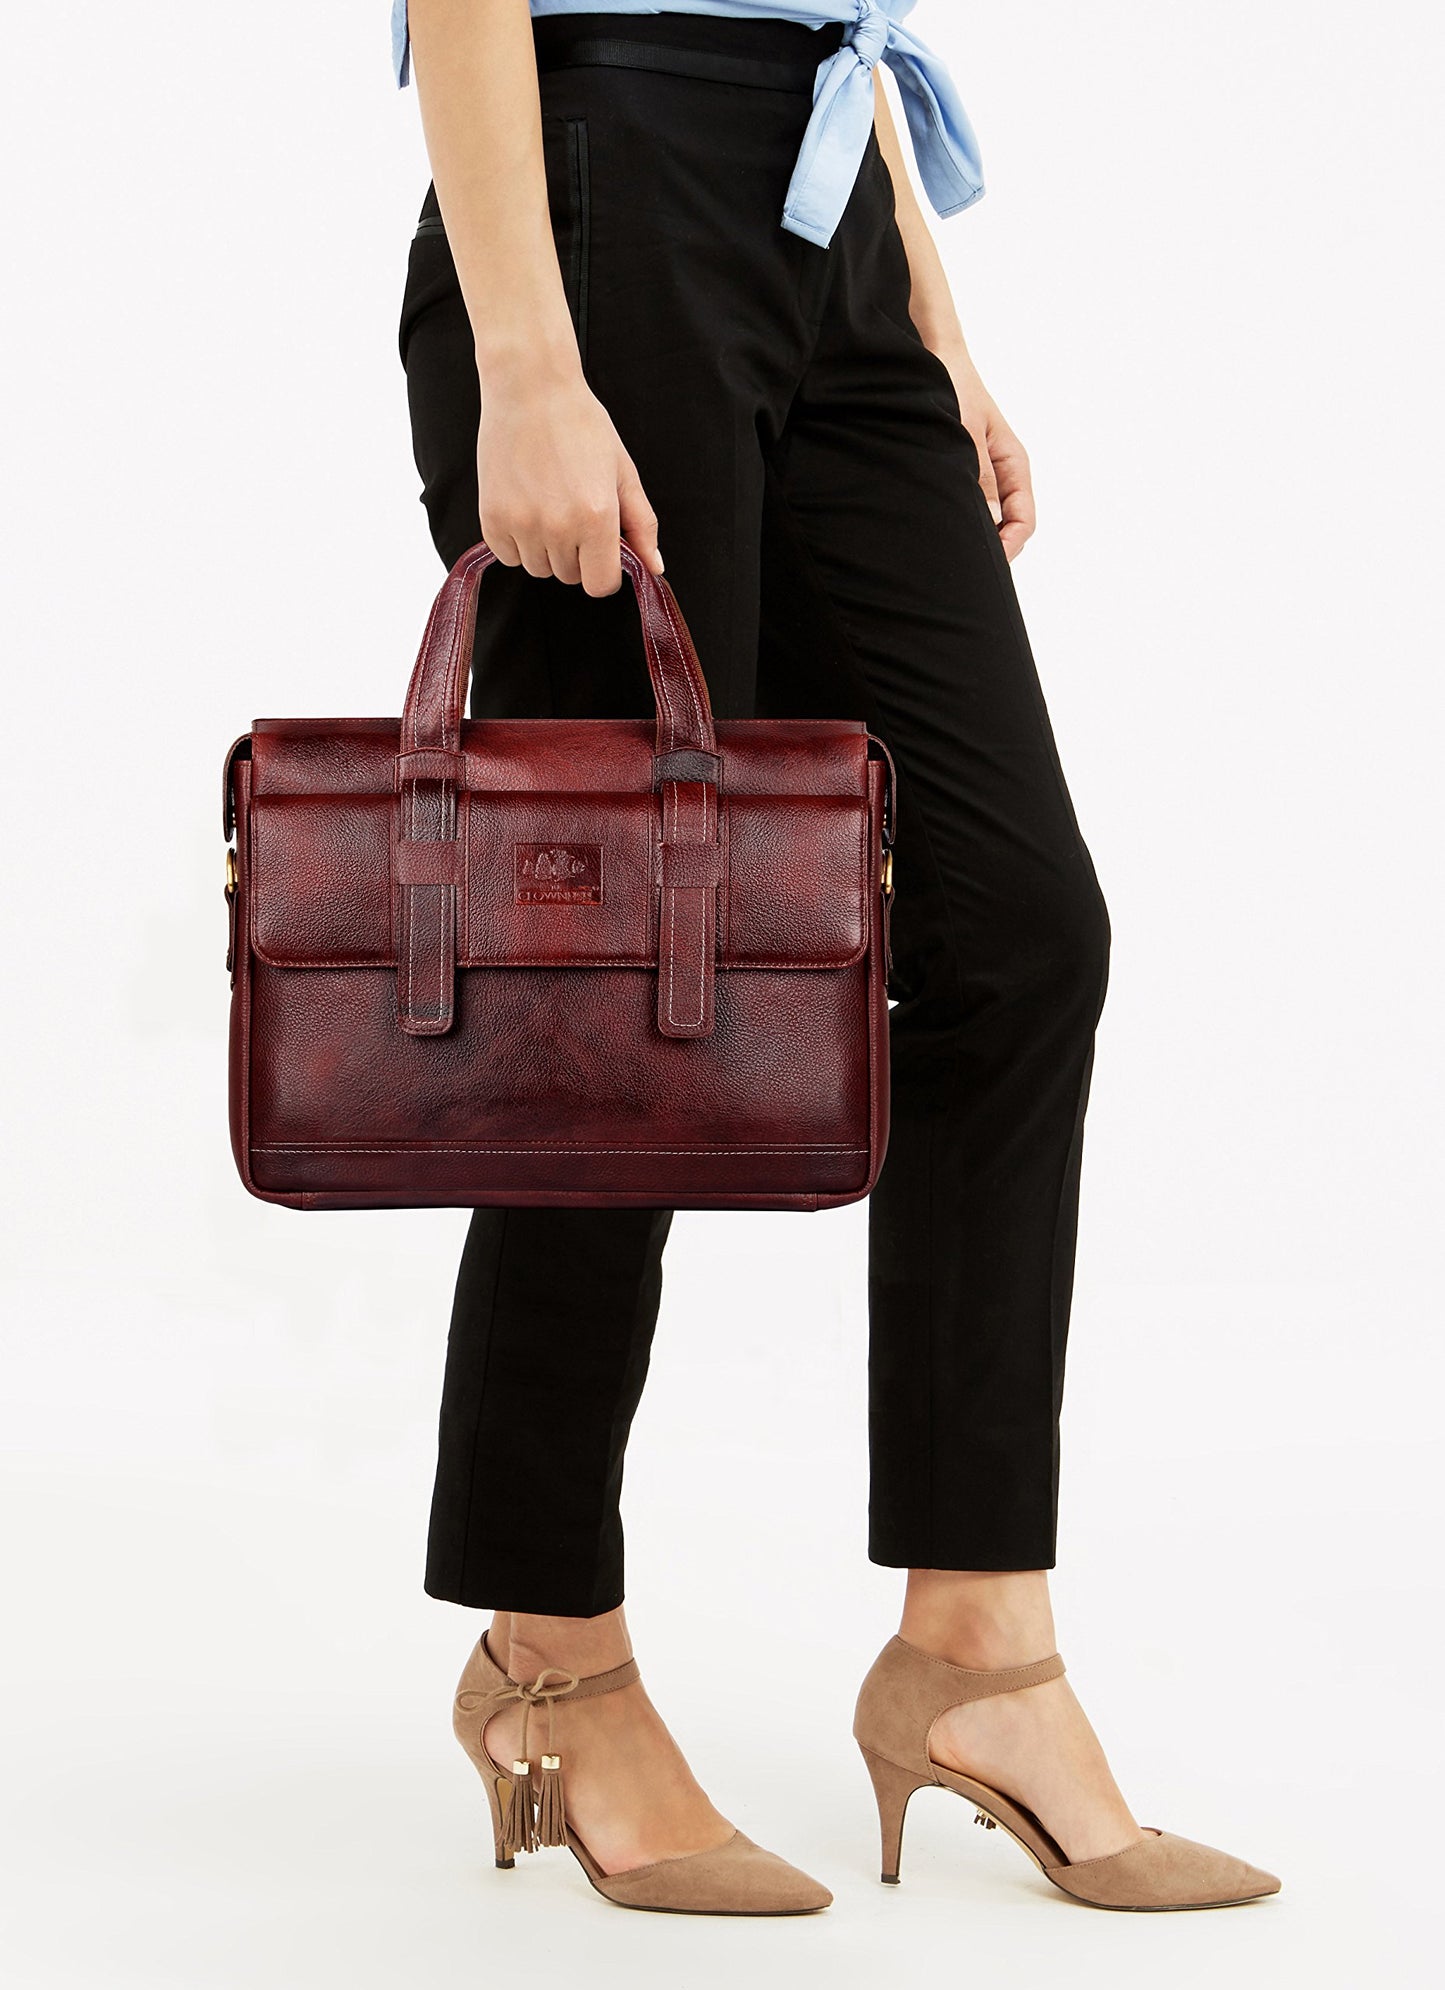 THE CLOWNFISH Vino 15.6-inch Laptop Bag (Wine Red)